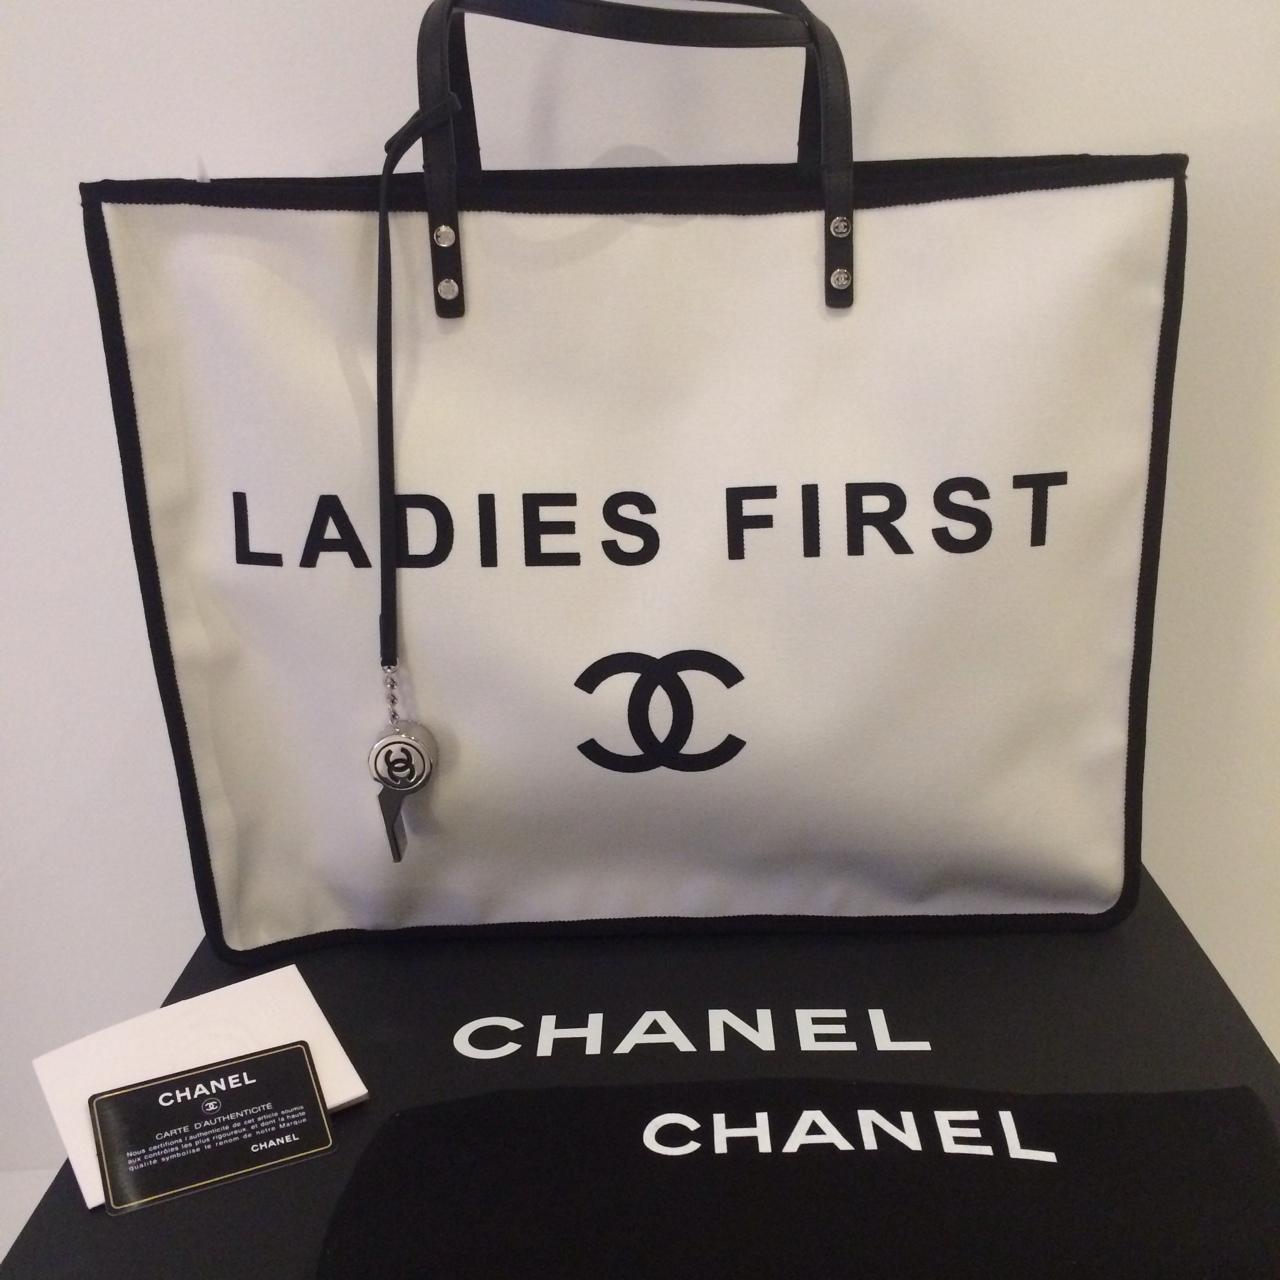 Authentic Chanel 'Ladies First' Canvas Tote (Sold